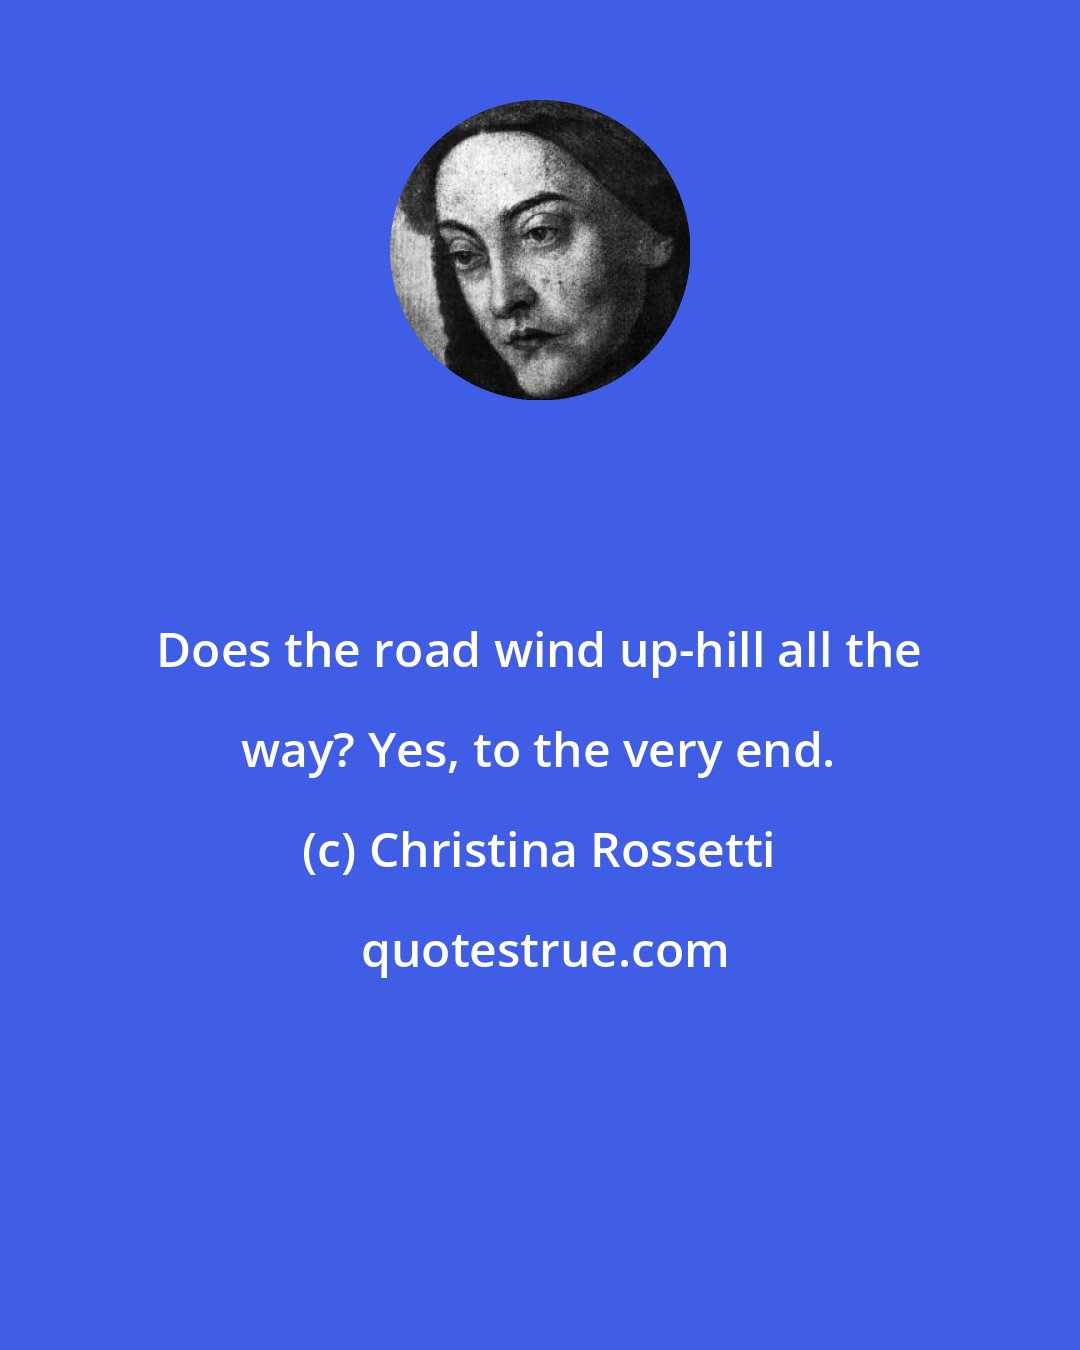 Christina Rossetti: Does the road wind up-hill all the way? Yes, to the very end.